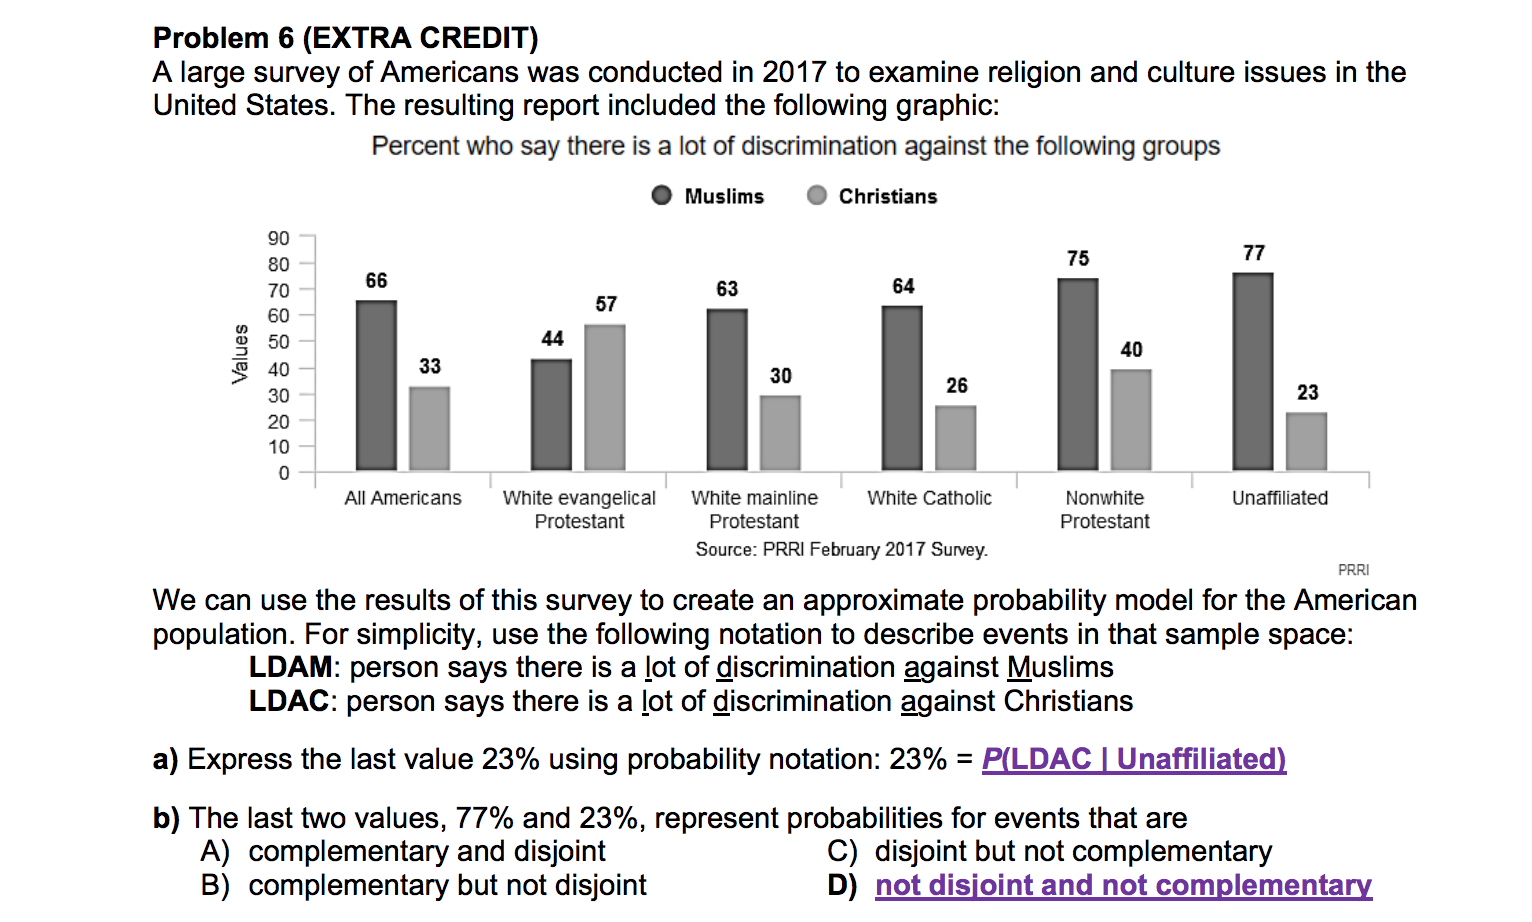 Problem 6 (EXTRA CREDIT)
A large survey of Americans was conducted in 2017 to examine religion and culture issues in the
United States. The resulting report included the following graphic:
Percent who say there is a lot of discrimination against the following groups
Muslims
Christians
90
77
75
80
66
64
63
70
57
60
44
50
40
33
40
30
26
23
30
20
10
0
White evangelical
White Catholic
Nonwhite
Unaffiliated
All Americans
White mainline
Protestant
Protestant
Protestant
Source: PRRI February 2017 Survey
PRR
We can use the results of this survey to create an approximate probability model for the American
population. For simplicity, use the following notation to describe events in that sample space:
LDAM: person says there is a lot of discrimination against Muslims
LDAC: person says there is a lot of discrimination against Christians
a) Express the last value 23% using probability notation: 23% = P(LDACIUnaffiliated)
b) The last two values, 77% and 23%, represent probabilities for events that are
A) complementary and disjoint
B) complementary but not disjoint
C) disjoint but not complementary
D) not disioint and not complementary
Values
